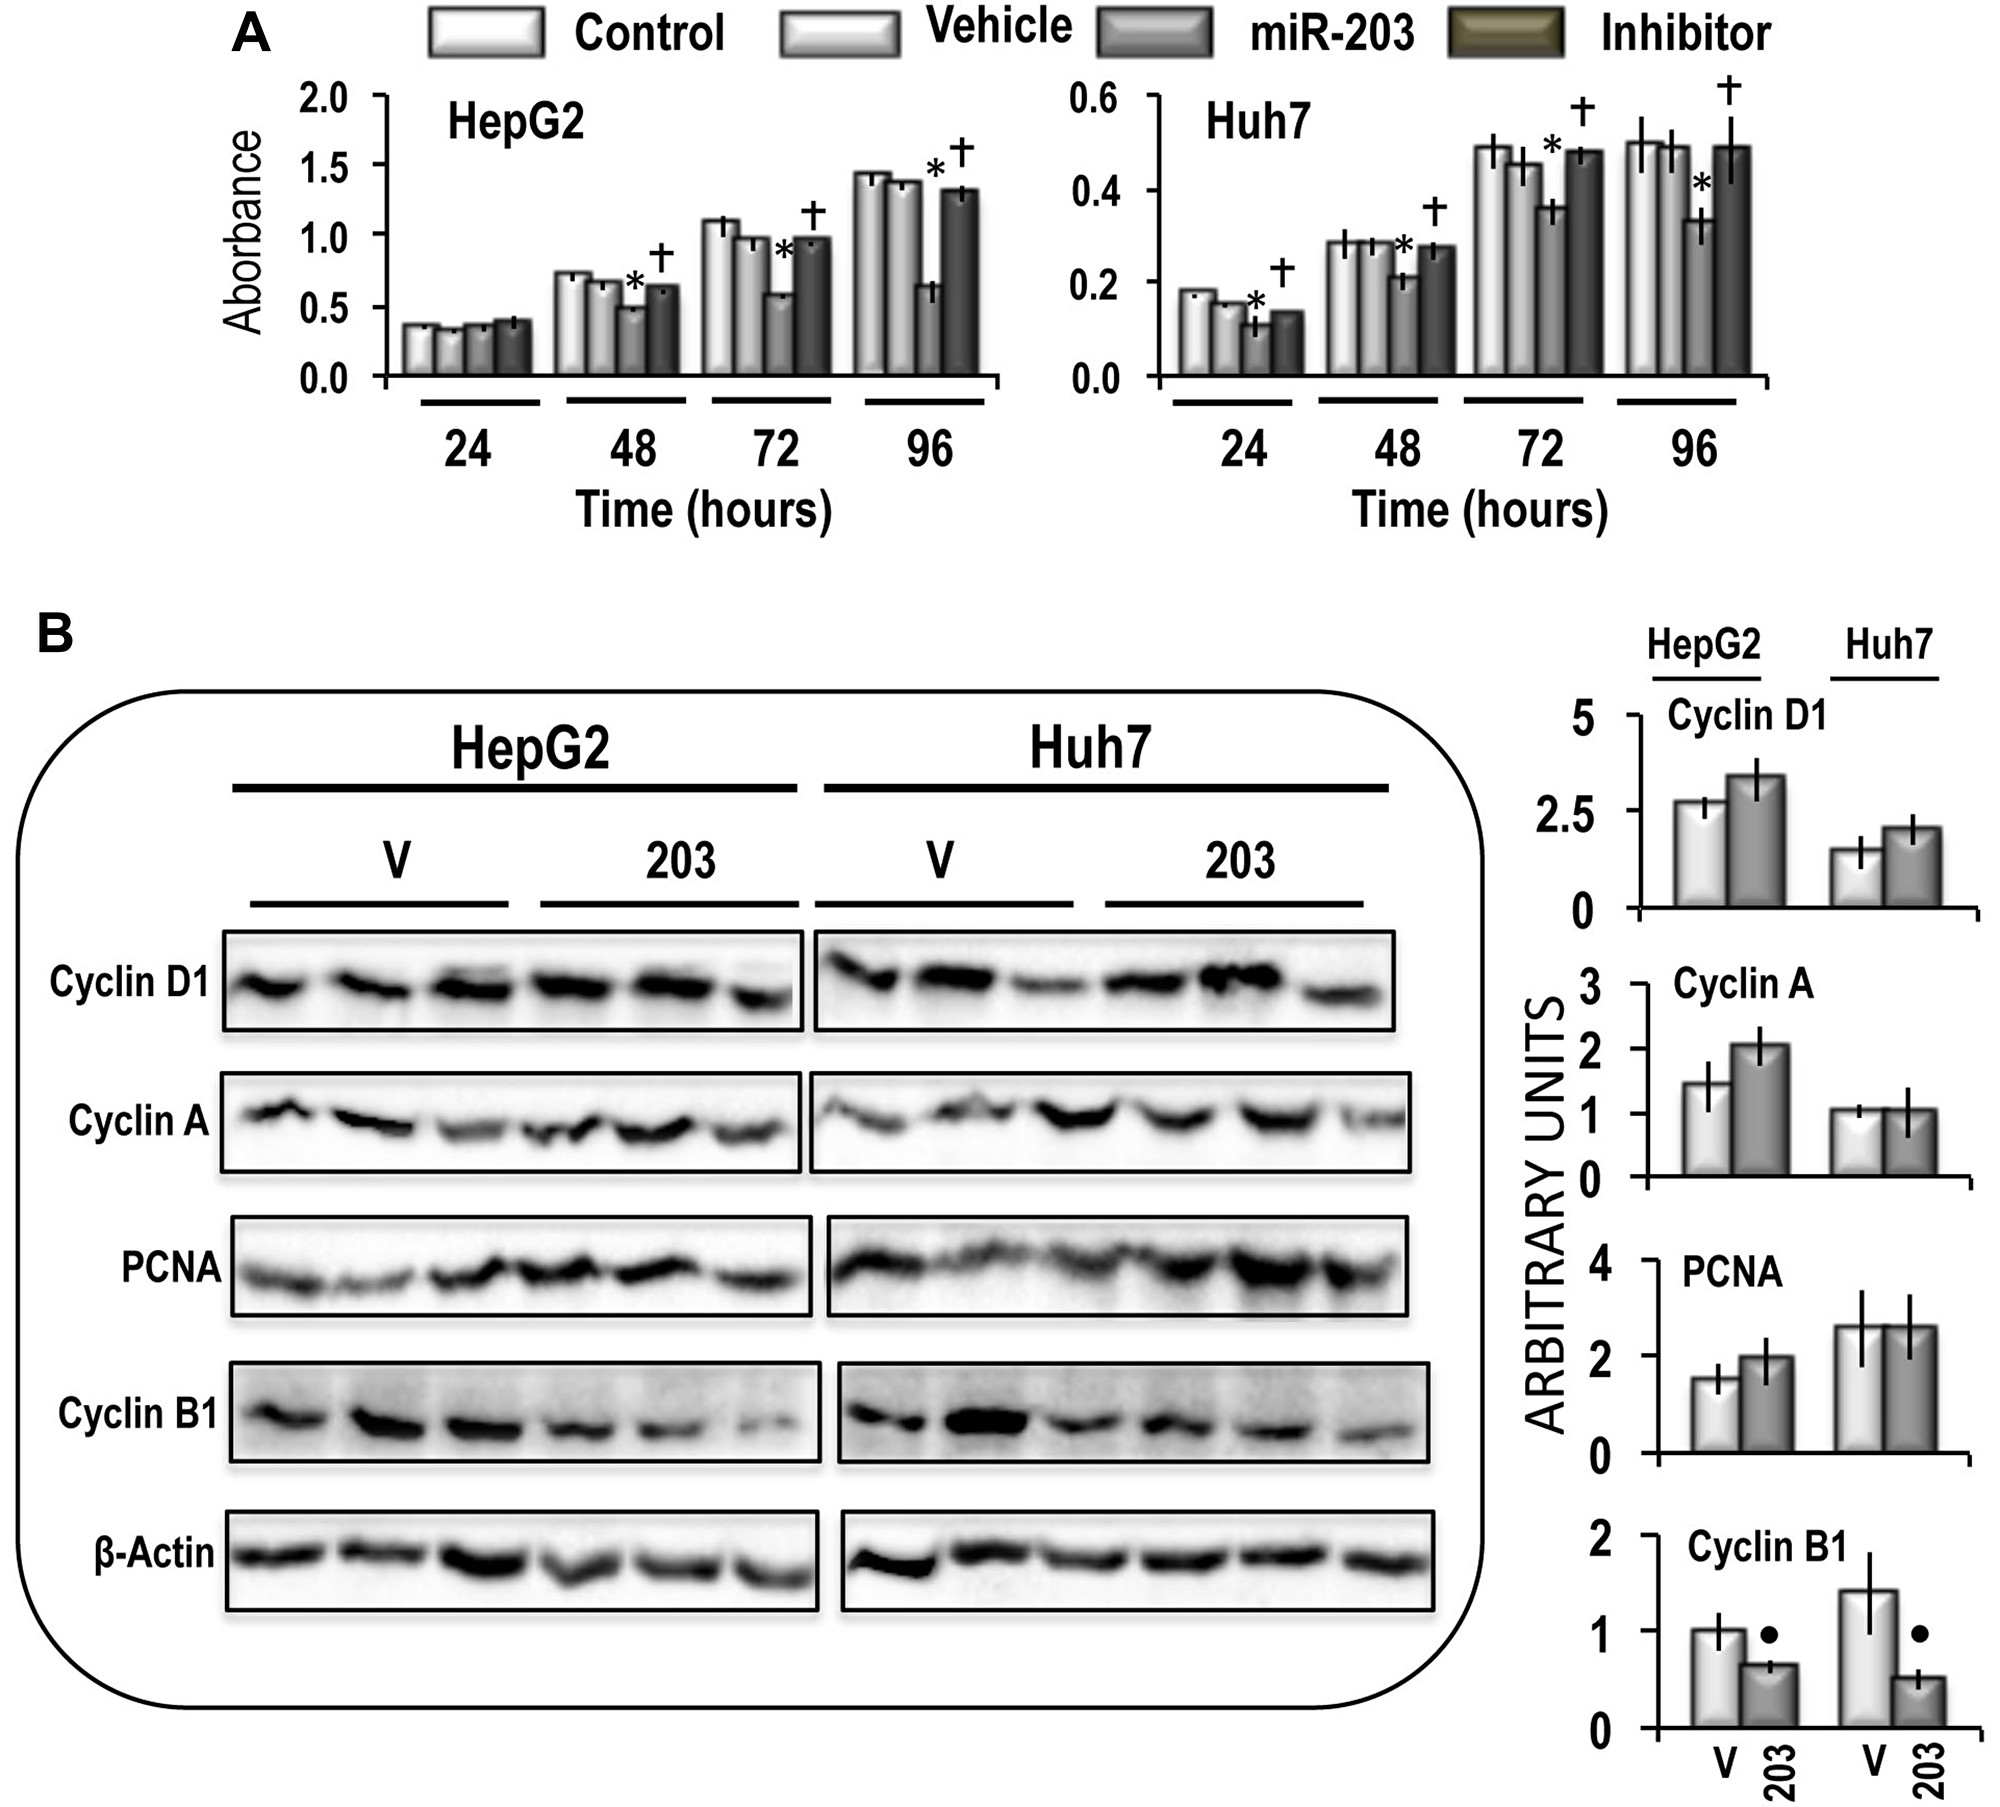 Effect of miR-203 forced expression on the viability, and expression of Cyclin D1, Cyclin A, PCNA, and Cyclin B1 in HepG2 and Huh7 cells.